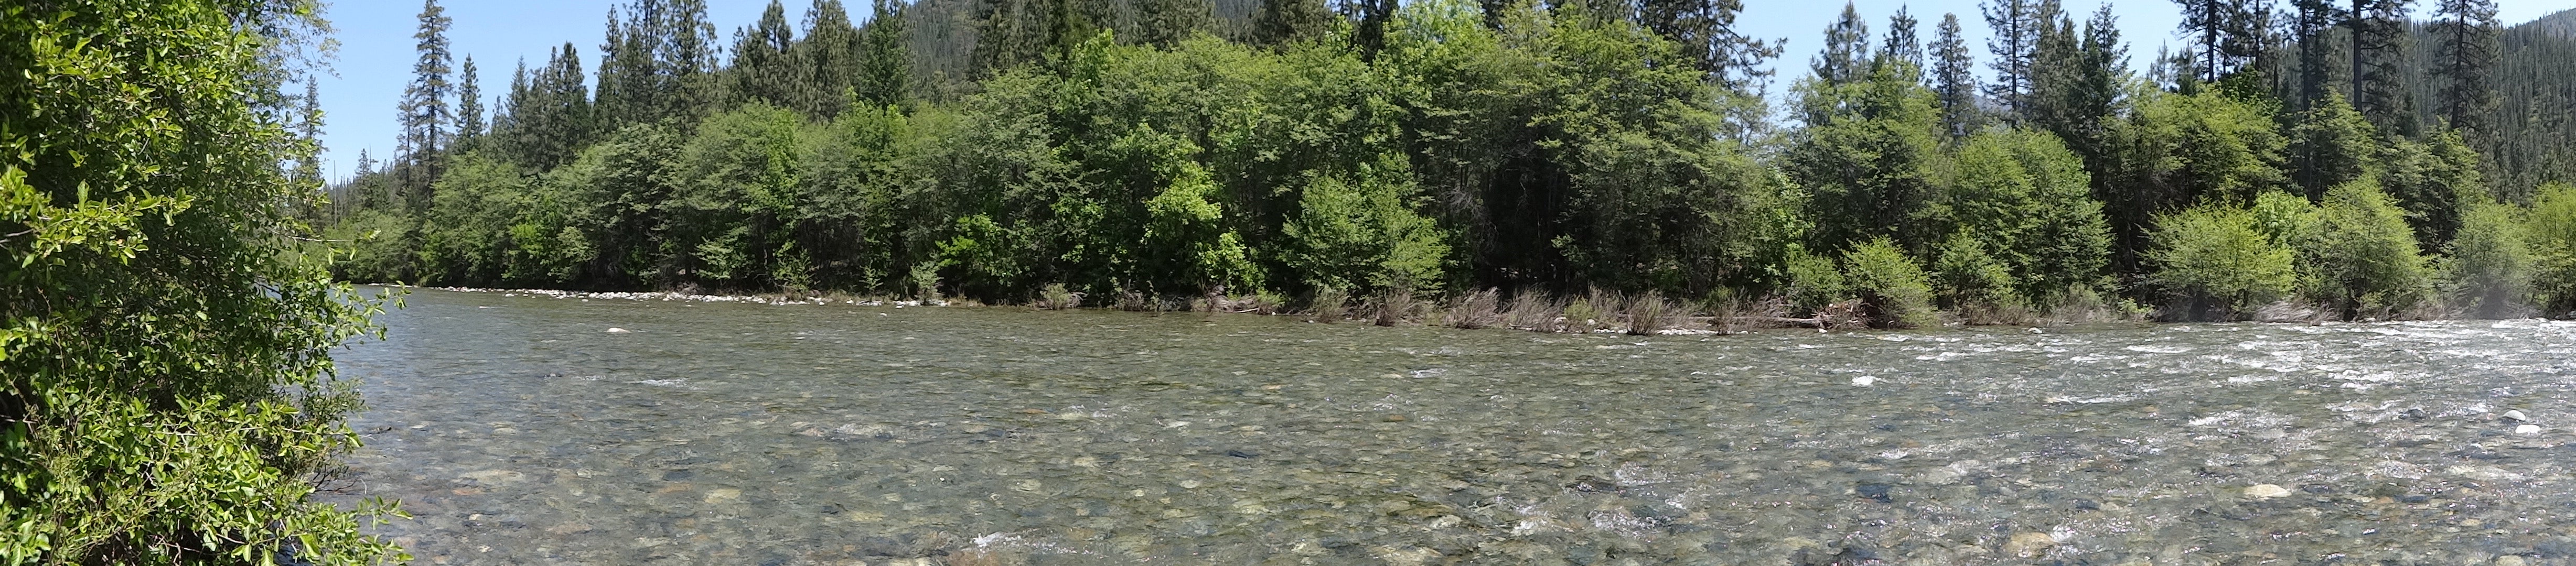 Panorama of the Trinity River near the cabin